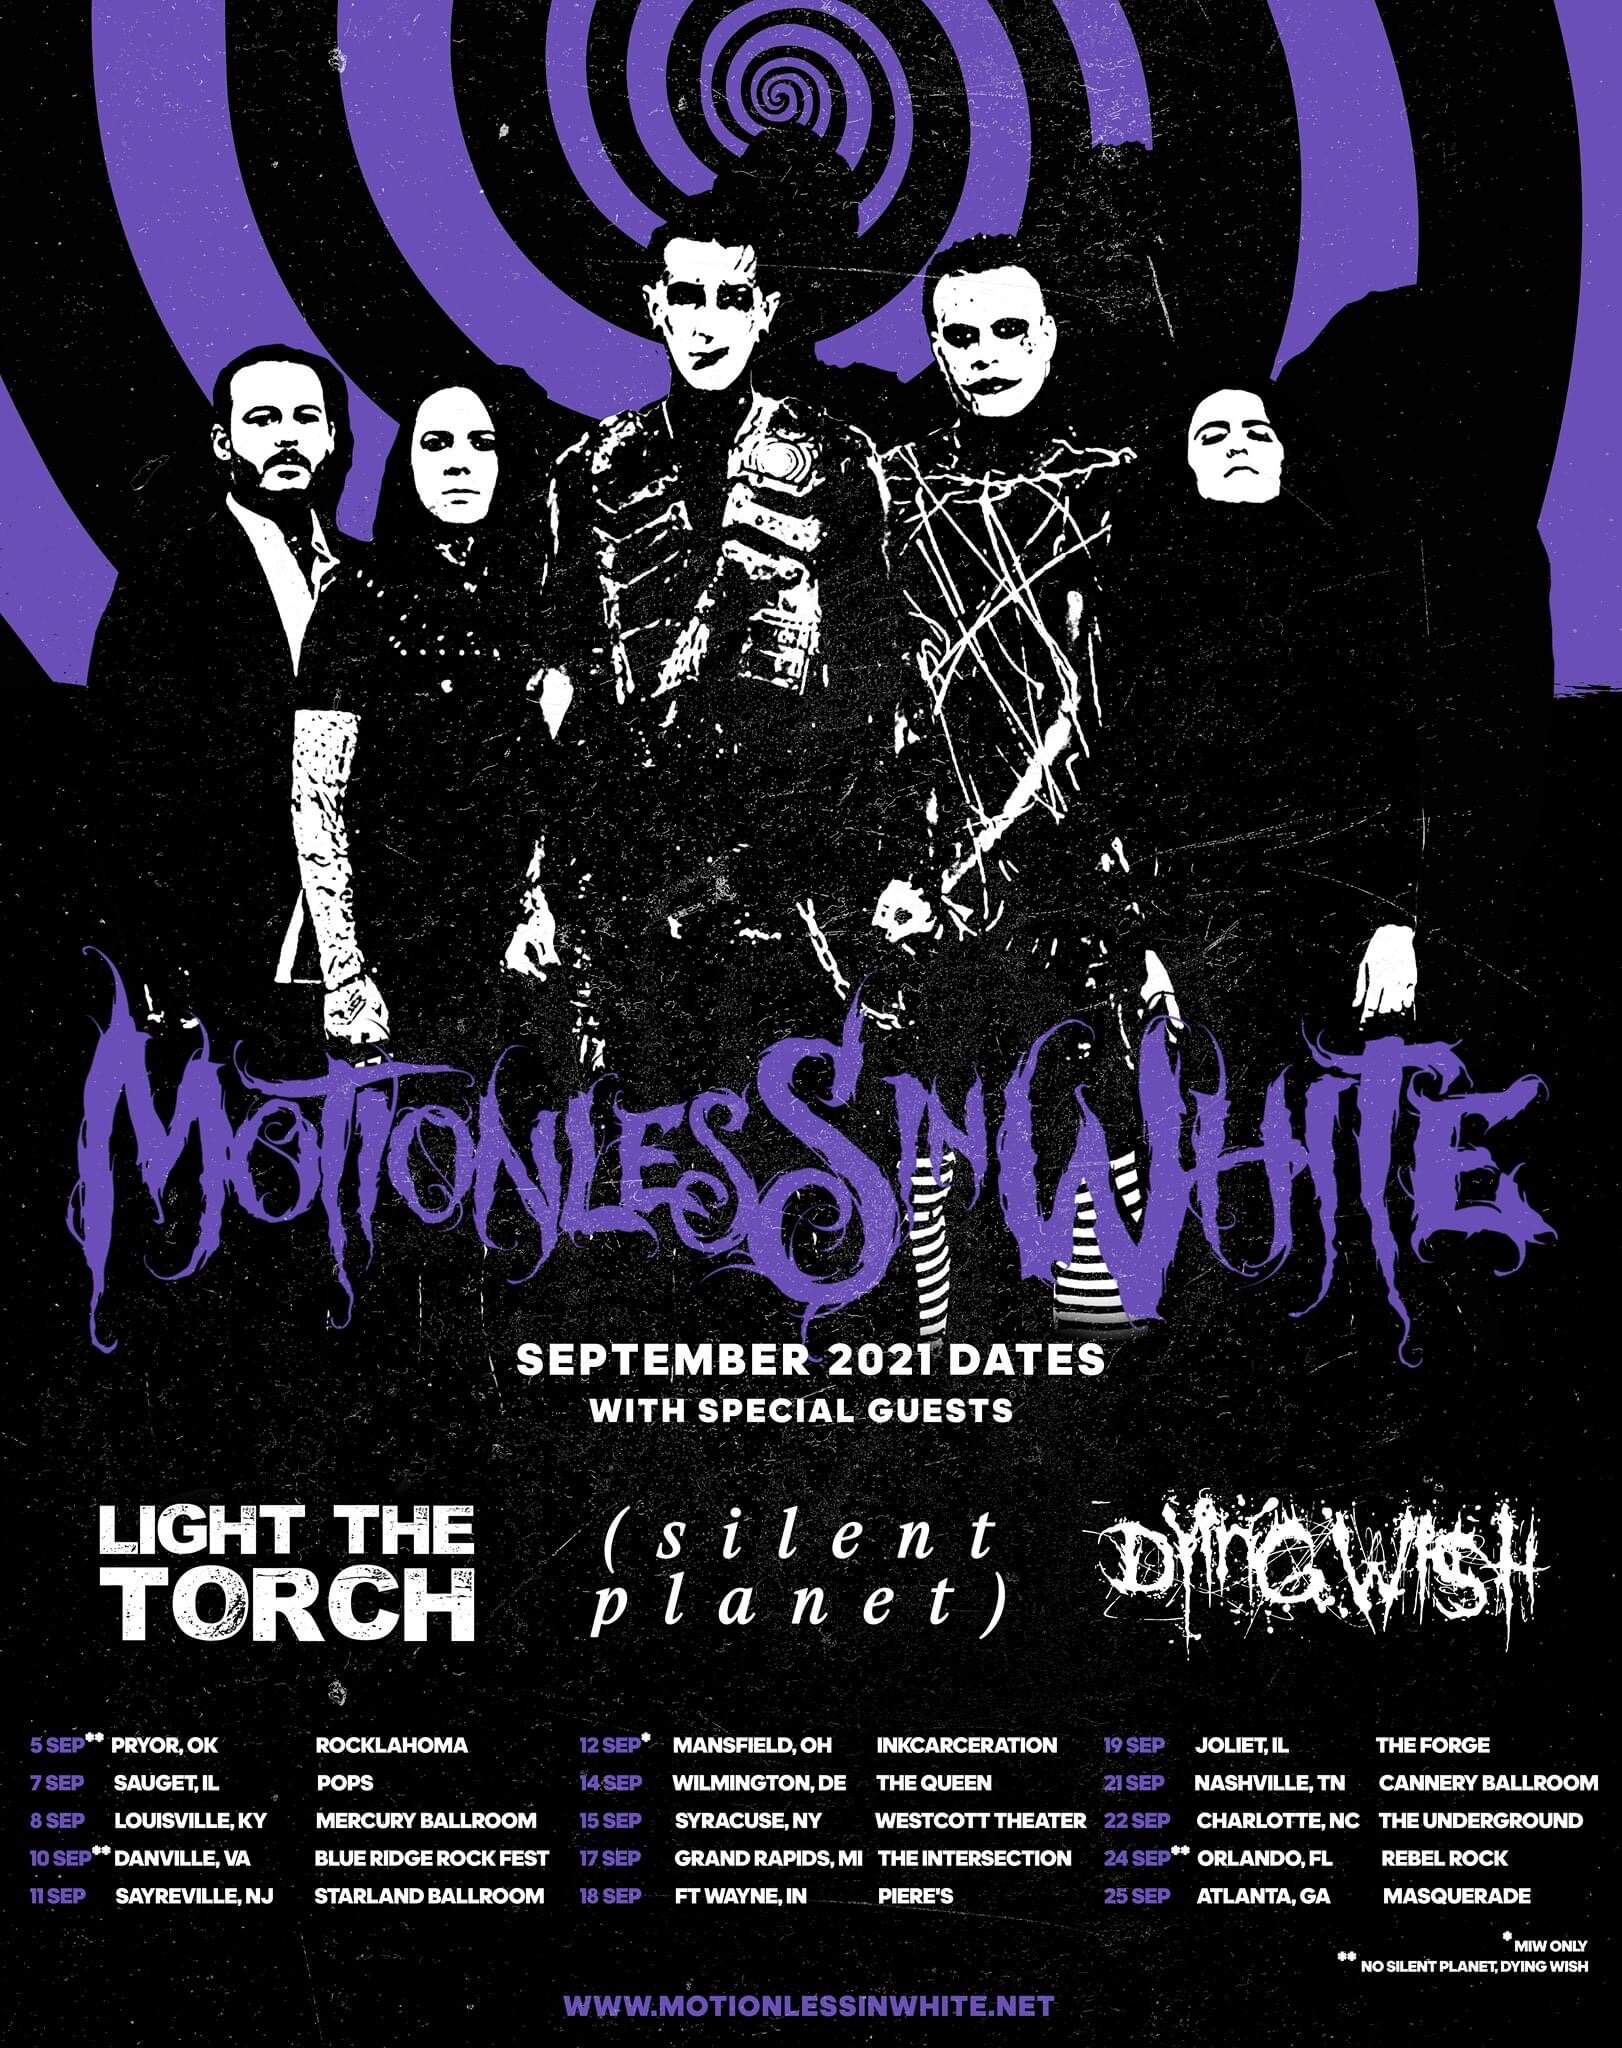 Motionless In White Announce September Dates with Light The Torch